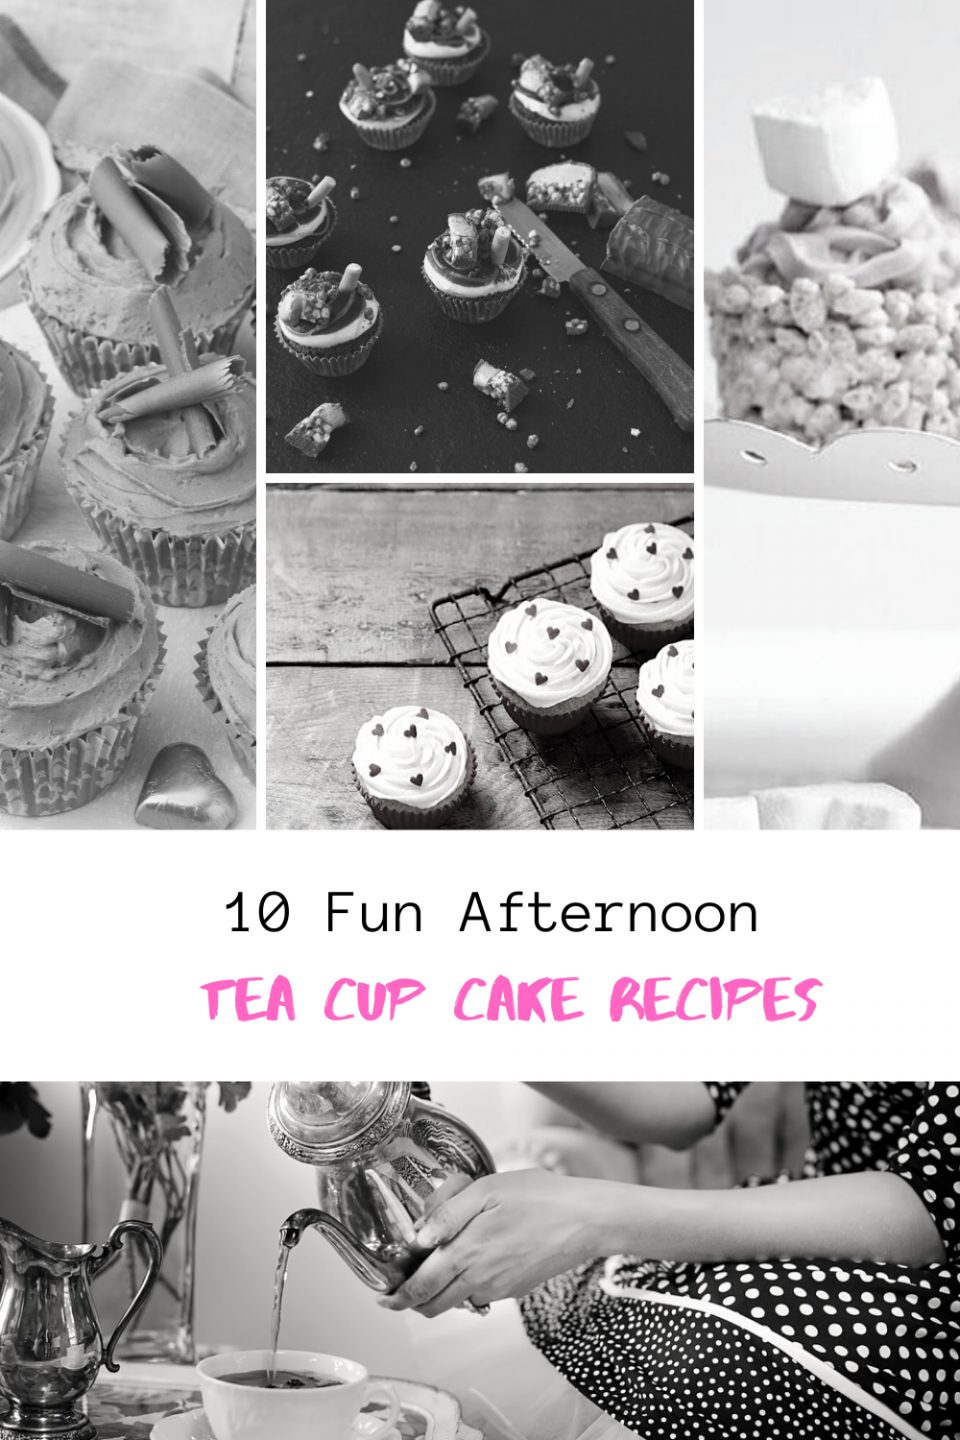 10 Fun Afternoon Tea Cup Cake Recipes To Try Out